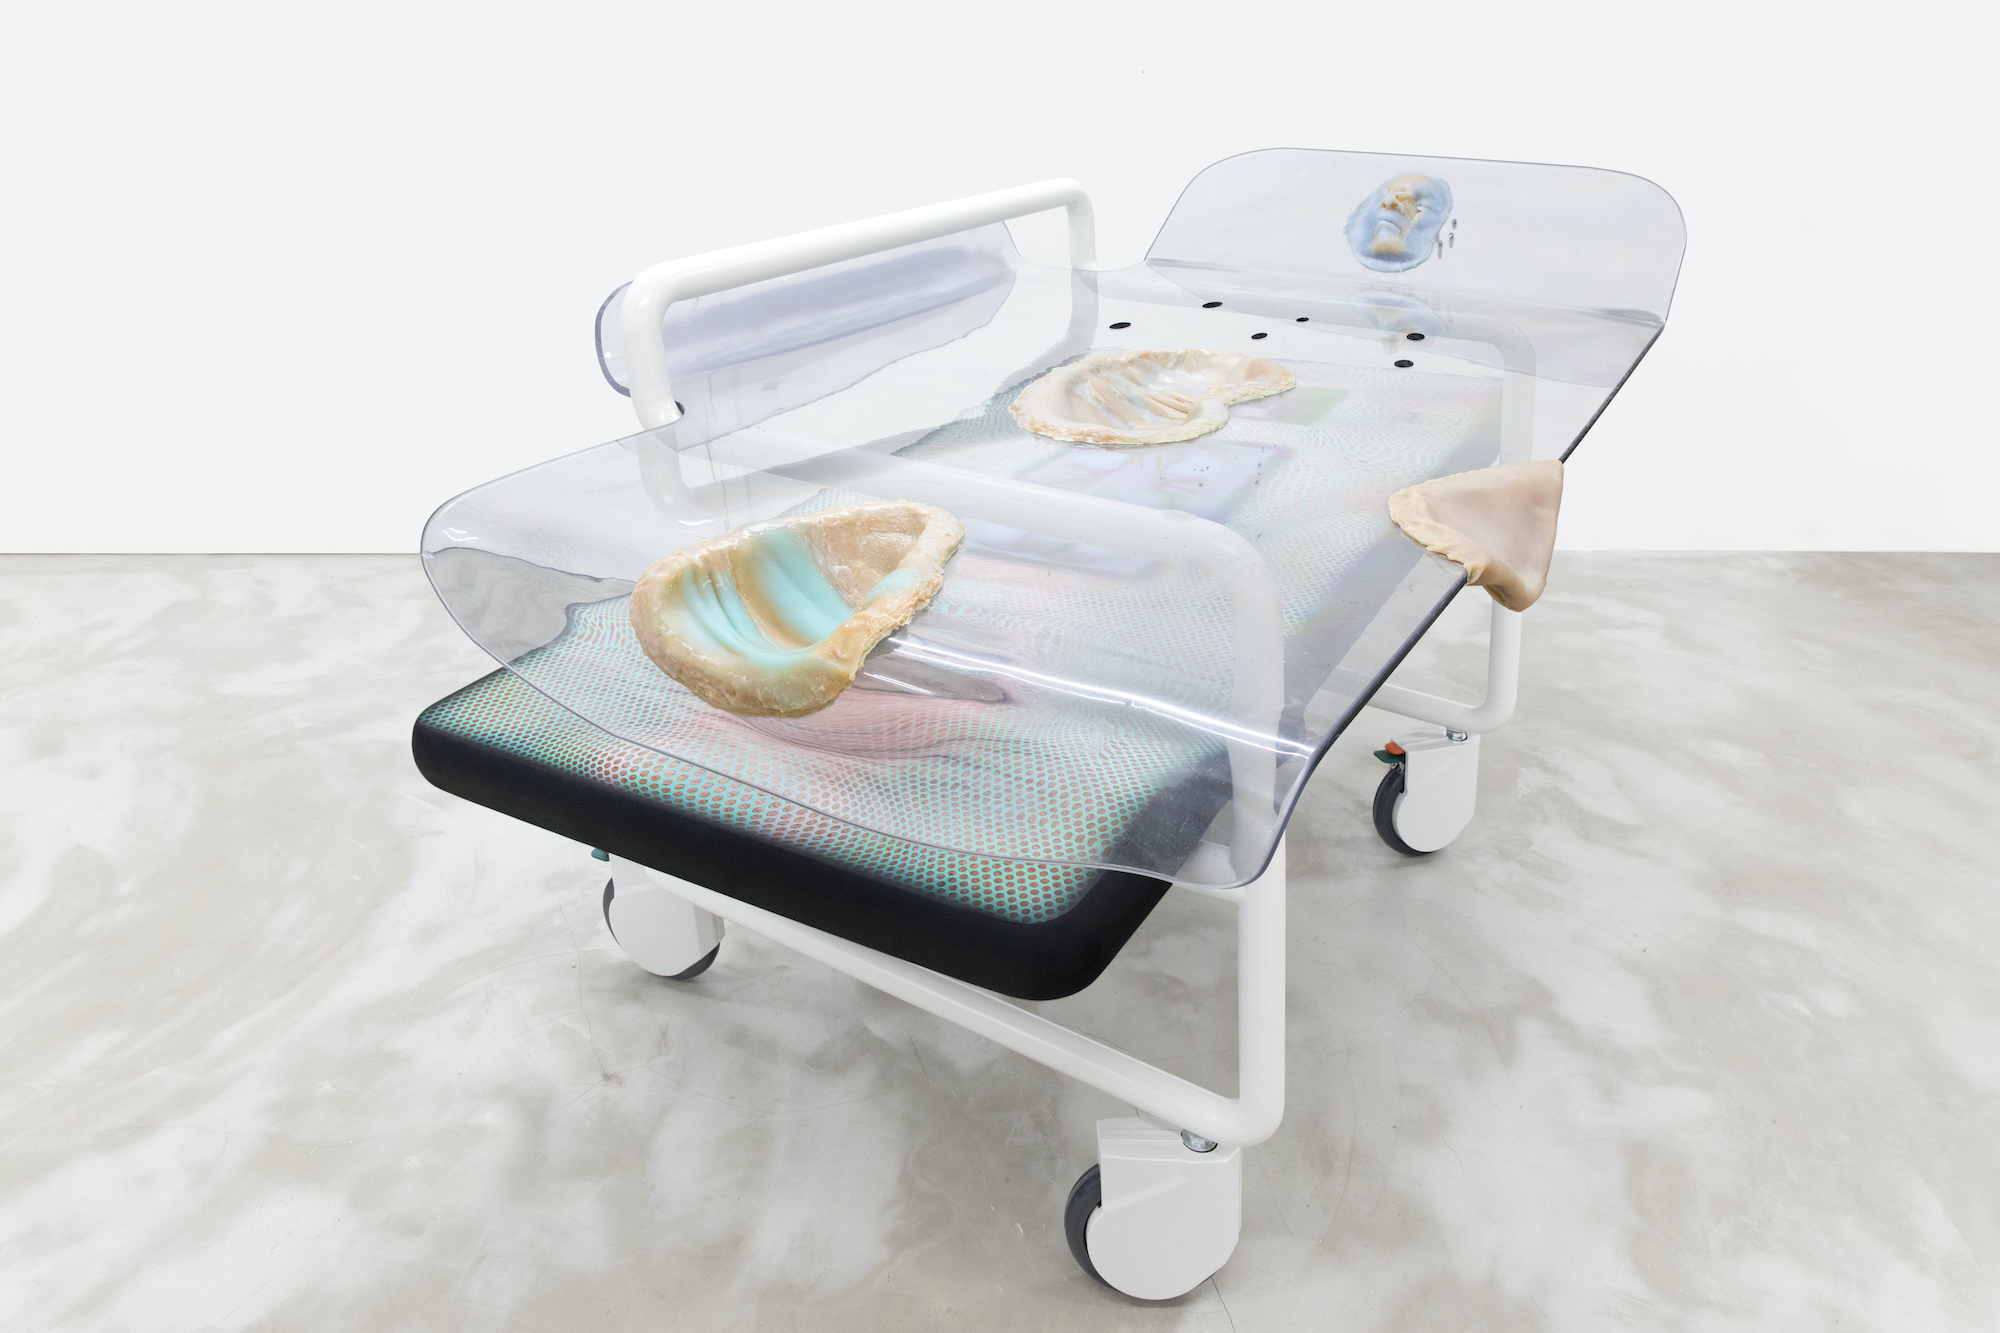 A clear medical bed with silicone imprints of.indentations left from what might be hands, face and crotch are imbedded into clear plexiglass.